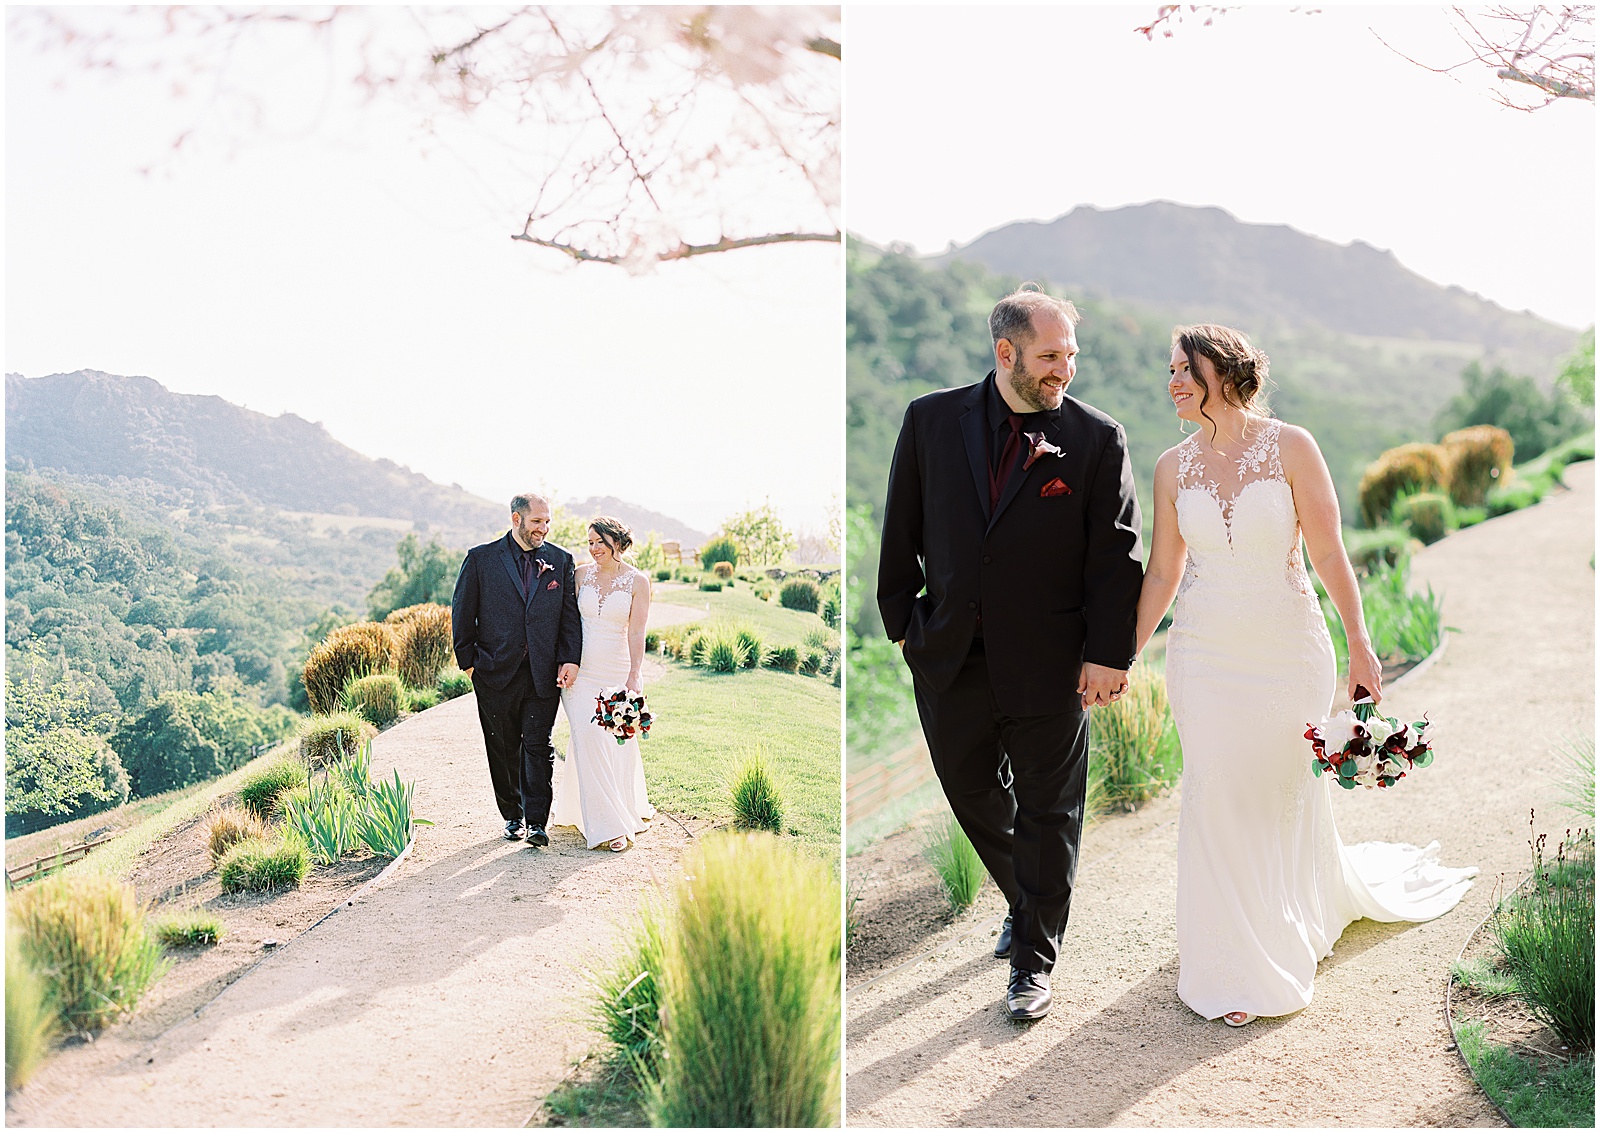 two portraits of bride and groom walking together holding hands